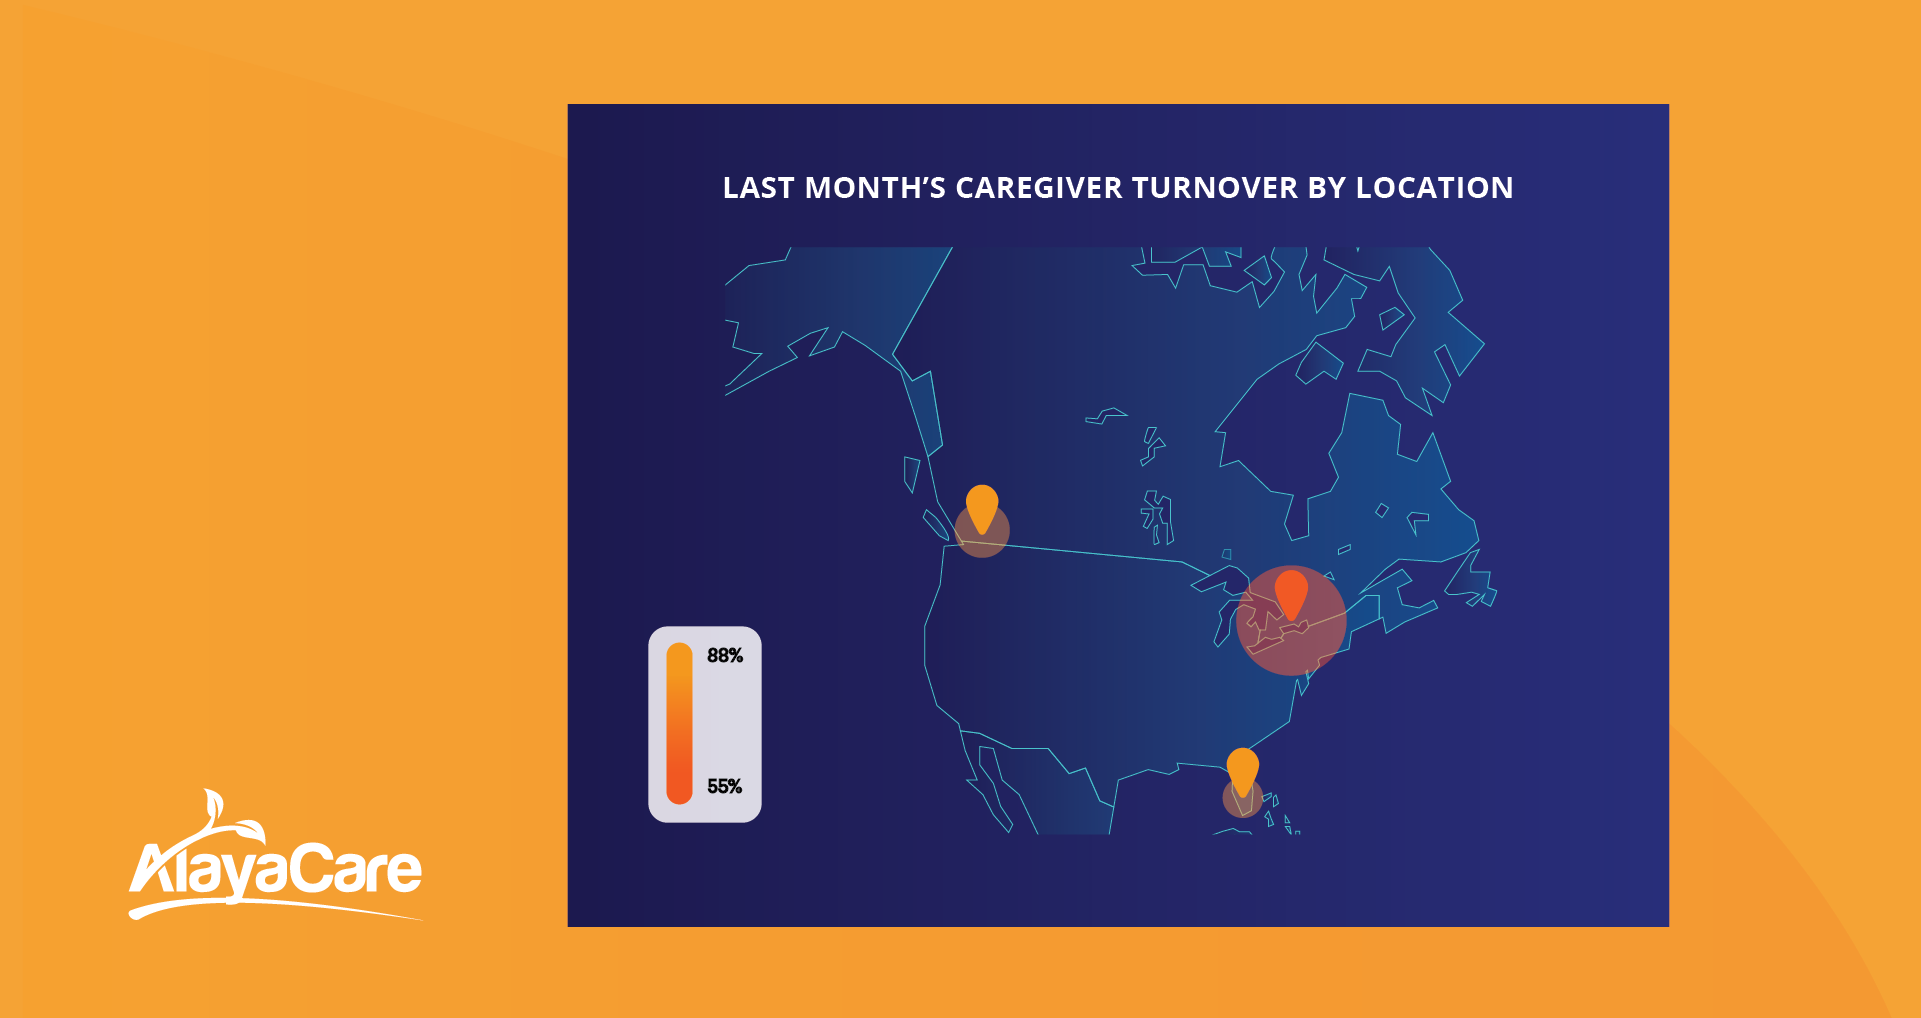 Caregiver turnover by location